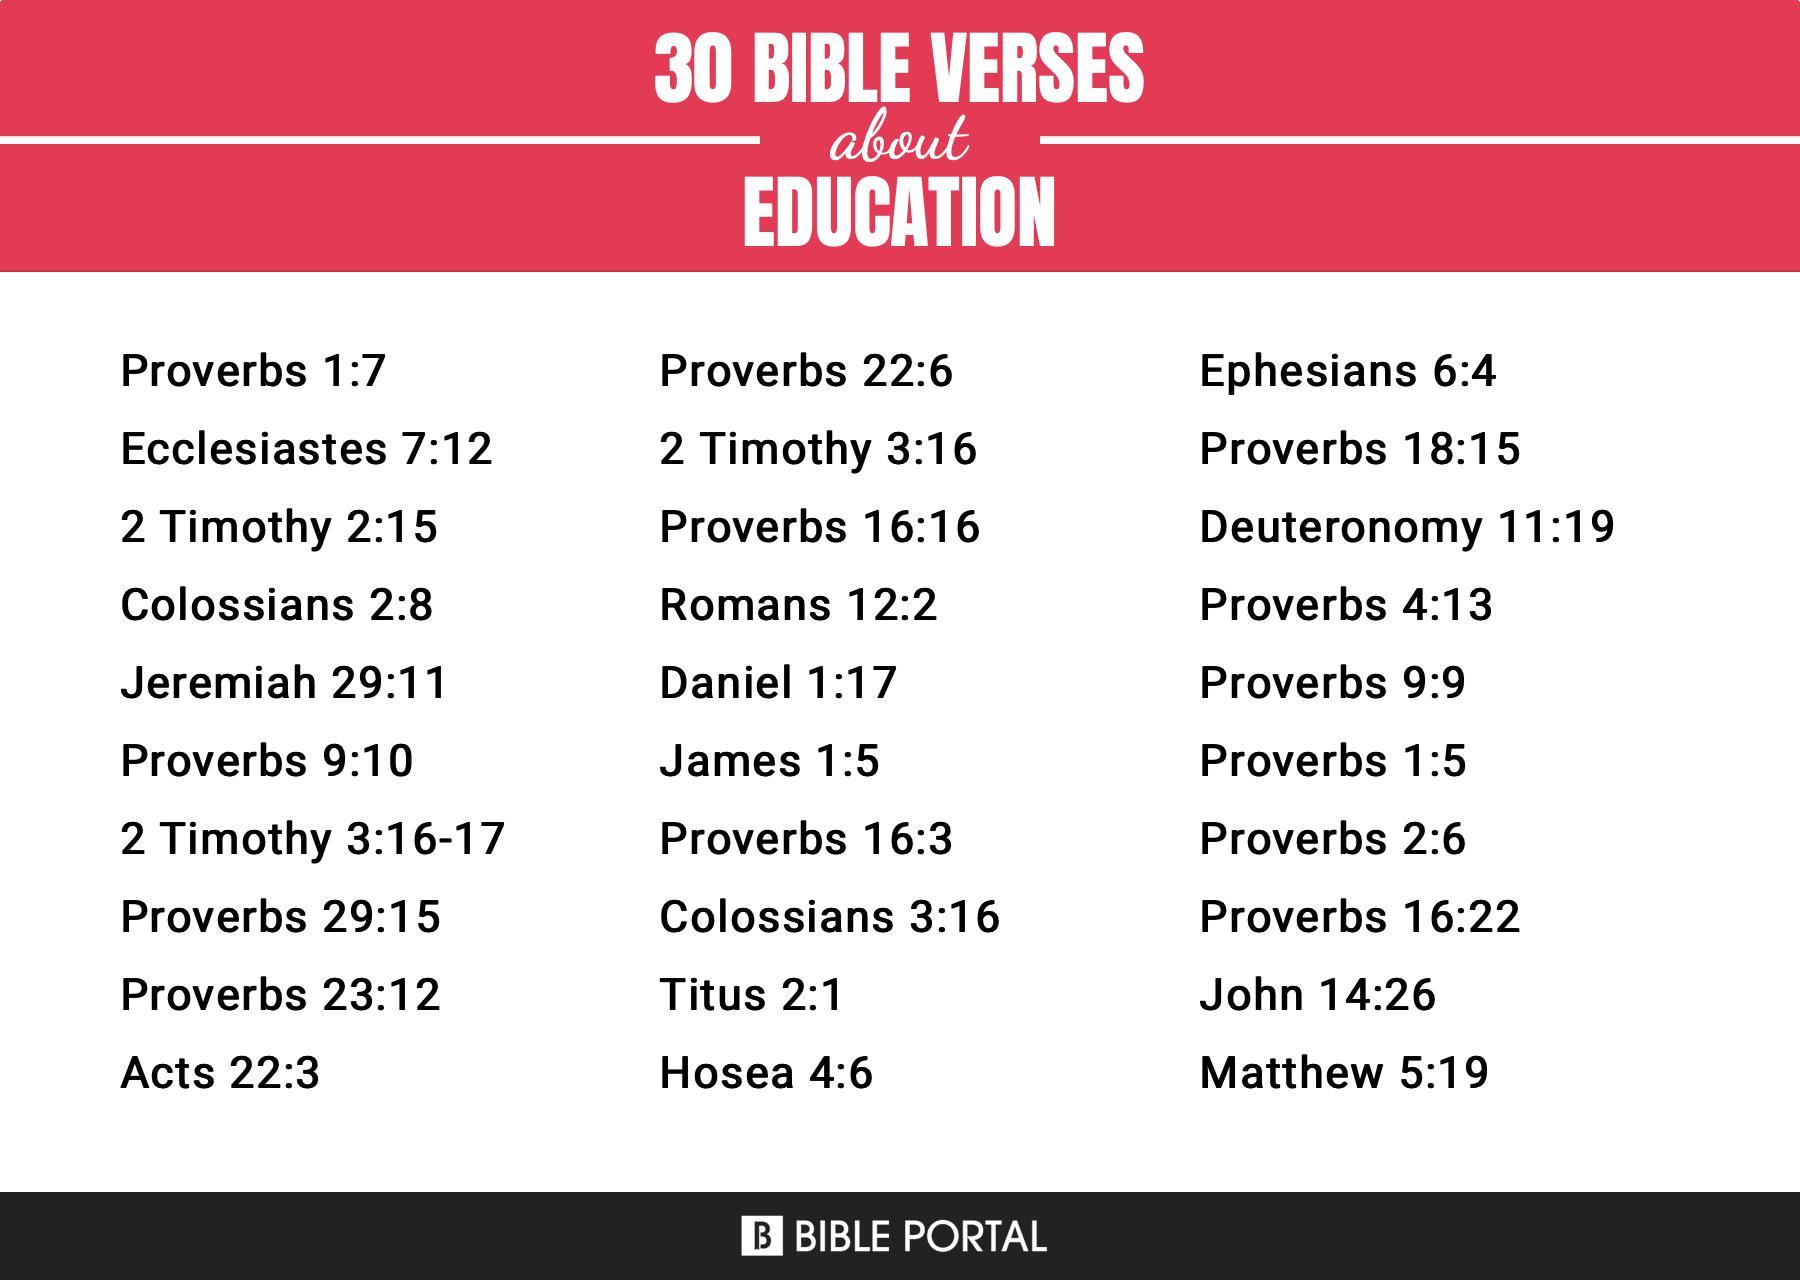 What Does the Bible Say about Education?